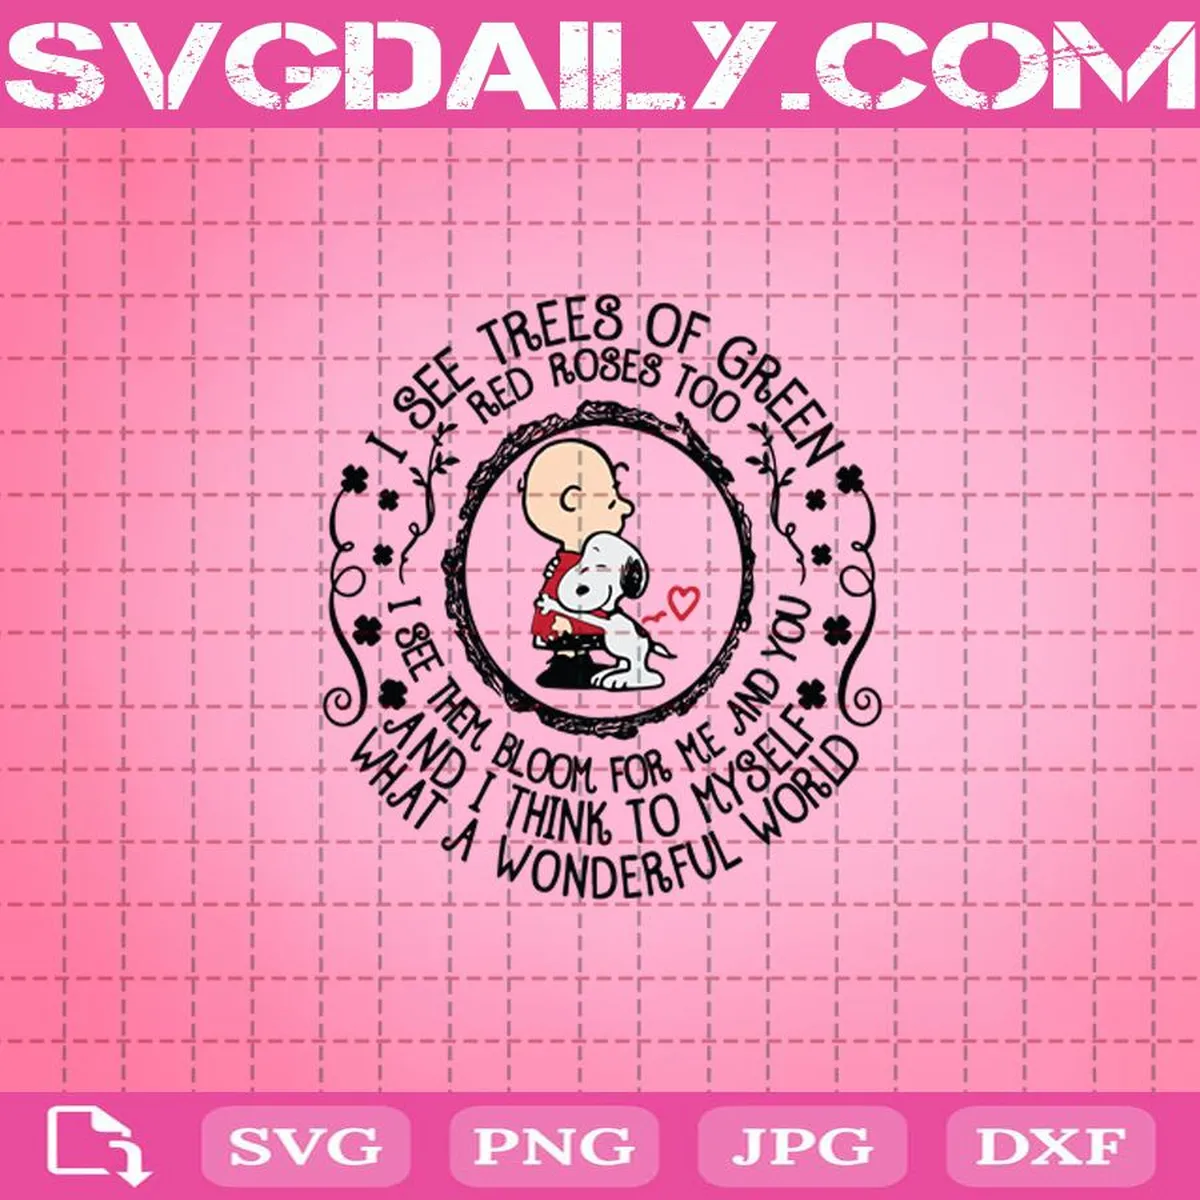 I See Trees Of Green Red Roses Too I See Them Bloom For Me And You And I Think To Myself What A Wonderful World Svg, Charlie Brown Svg, Snoopy Svg